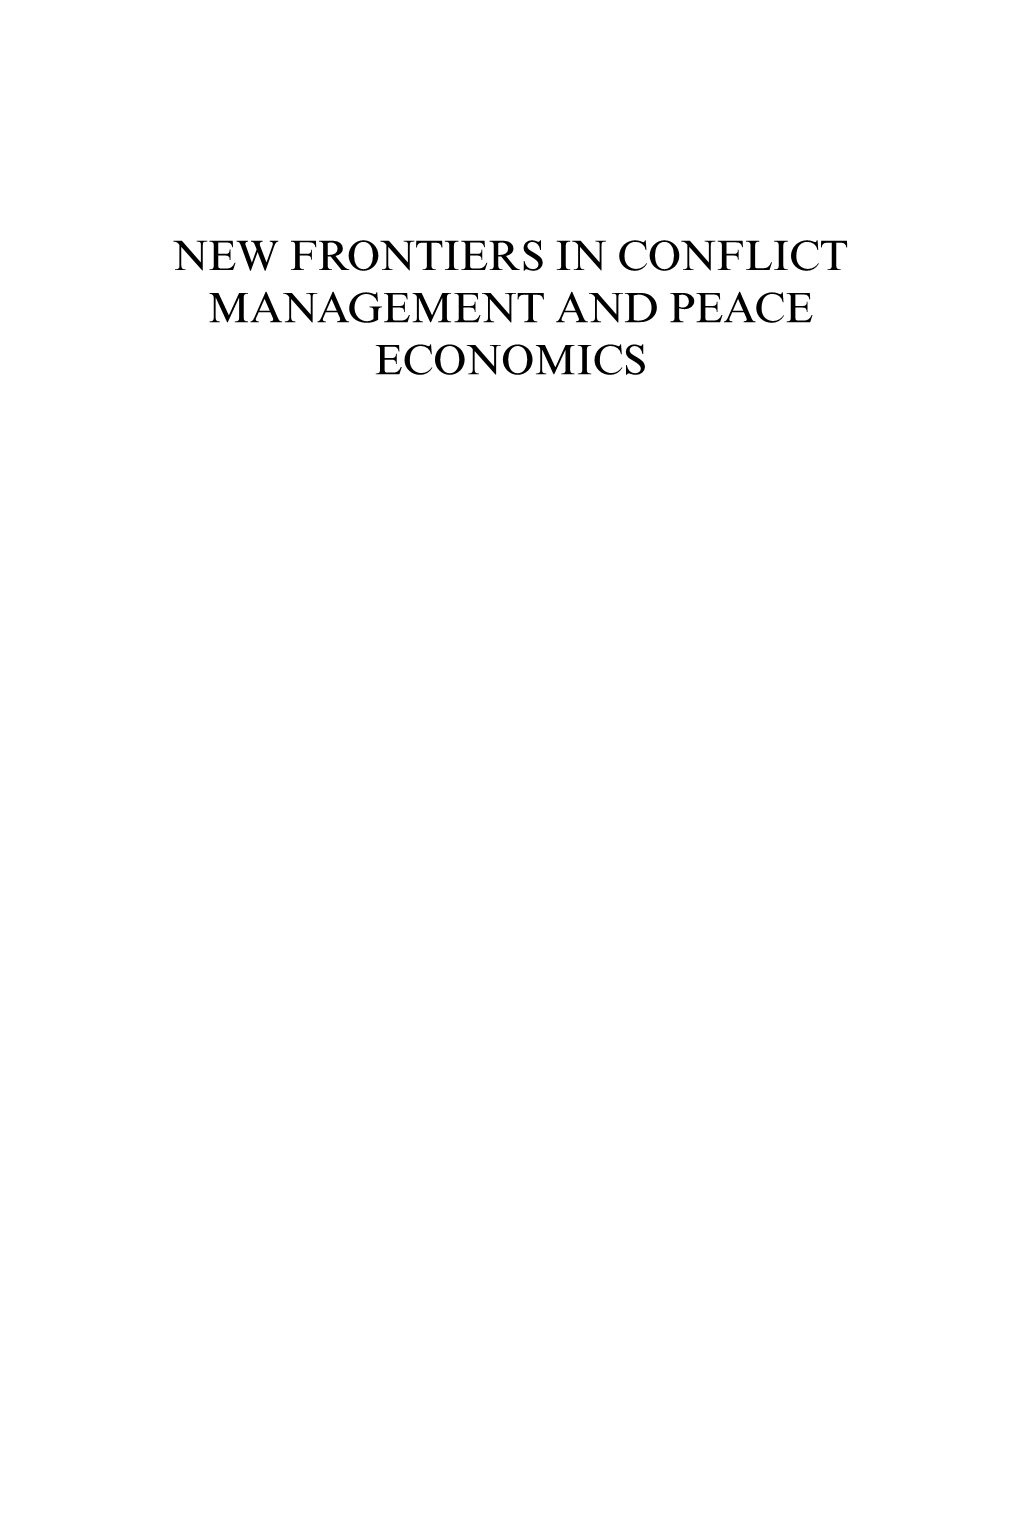 New Frontiers in Conflict Management and Peace Economics: with a Focus on Human Security